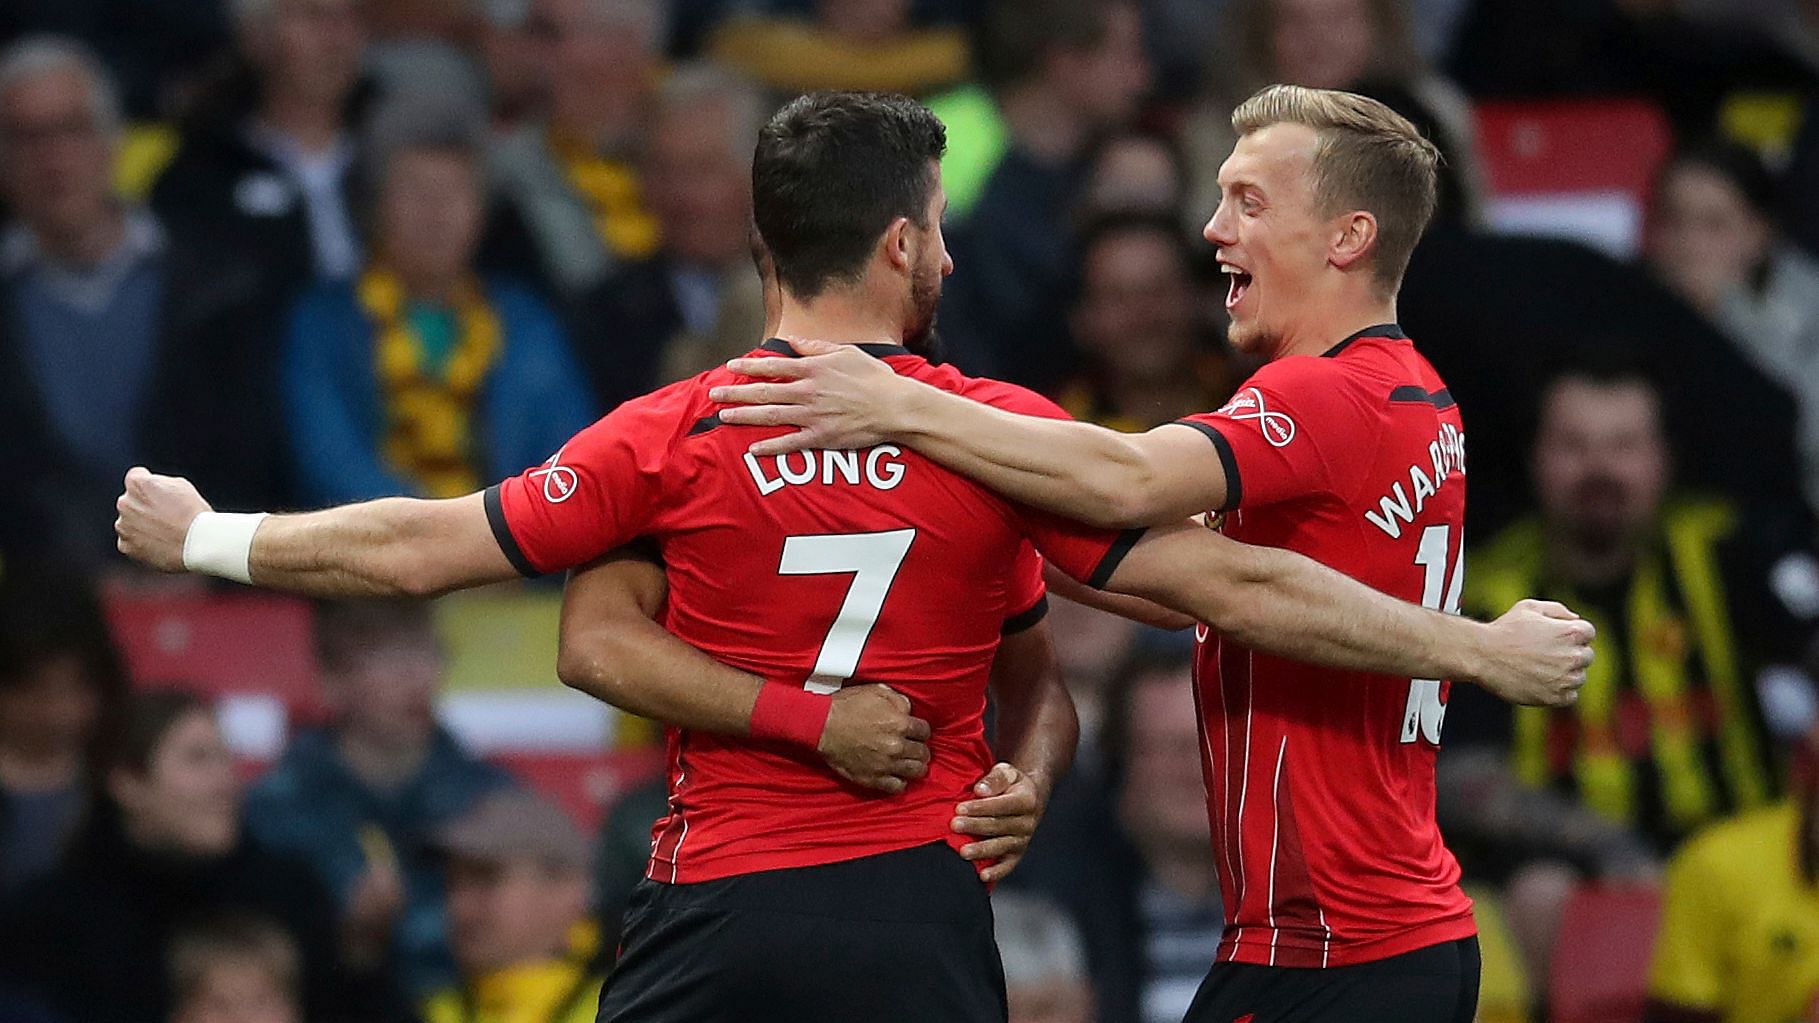 Southampton’s Shane Long celebrates scoring his side’s first goal of the game during the Premier League match at Vicarage Road, Watford.&nbsp;